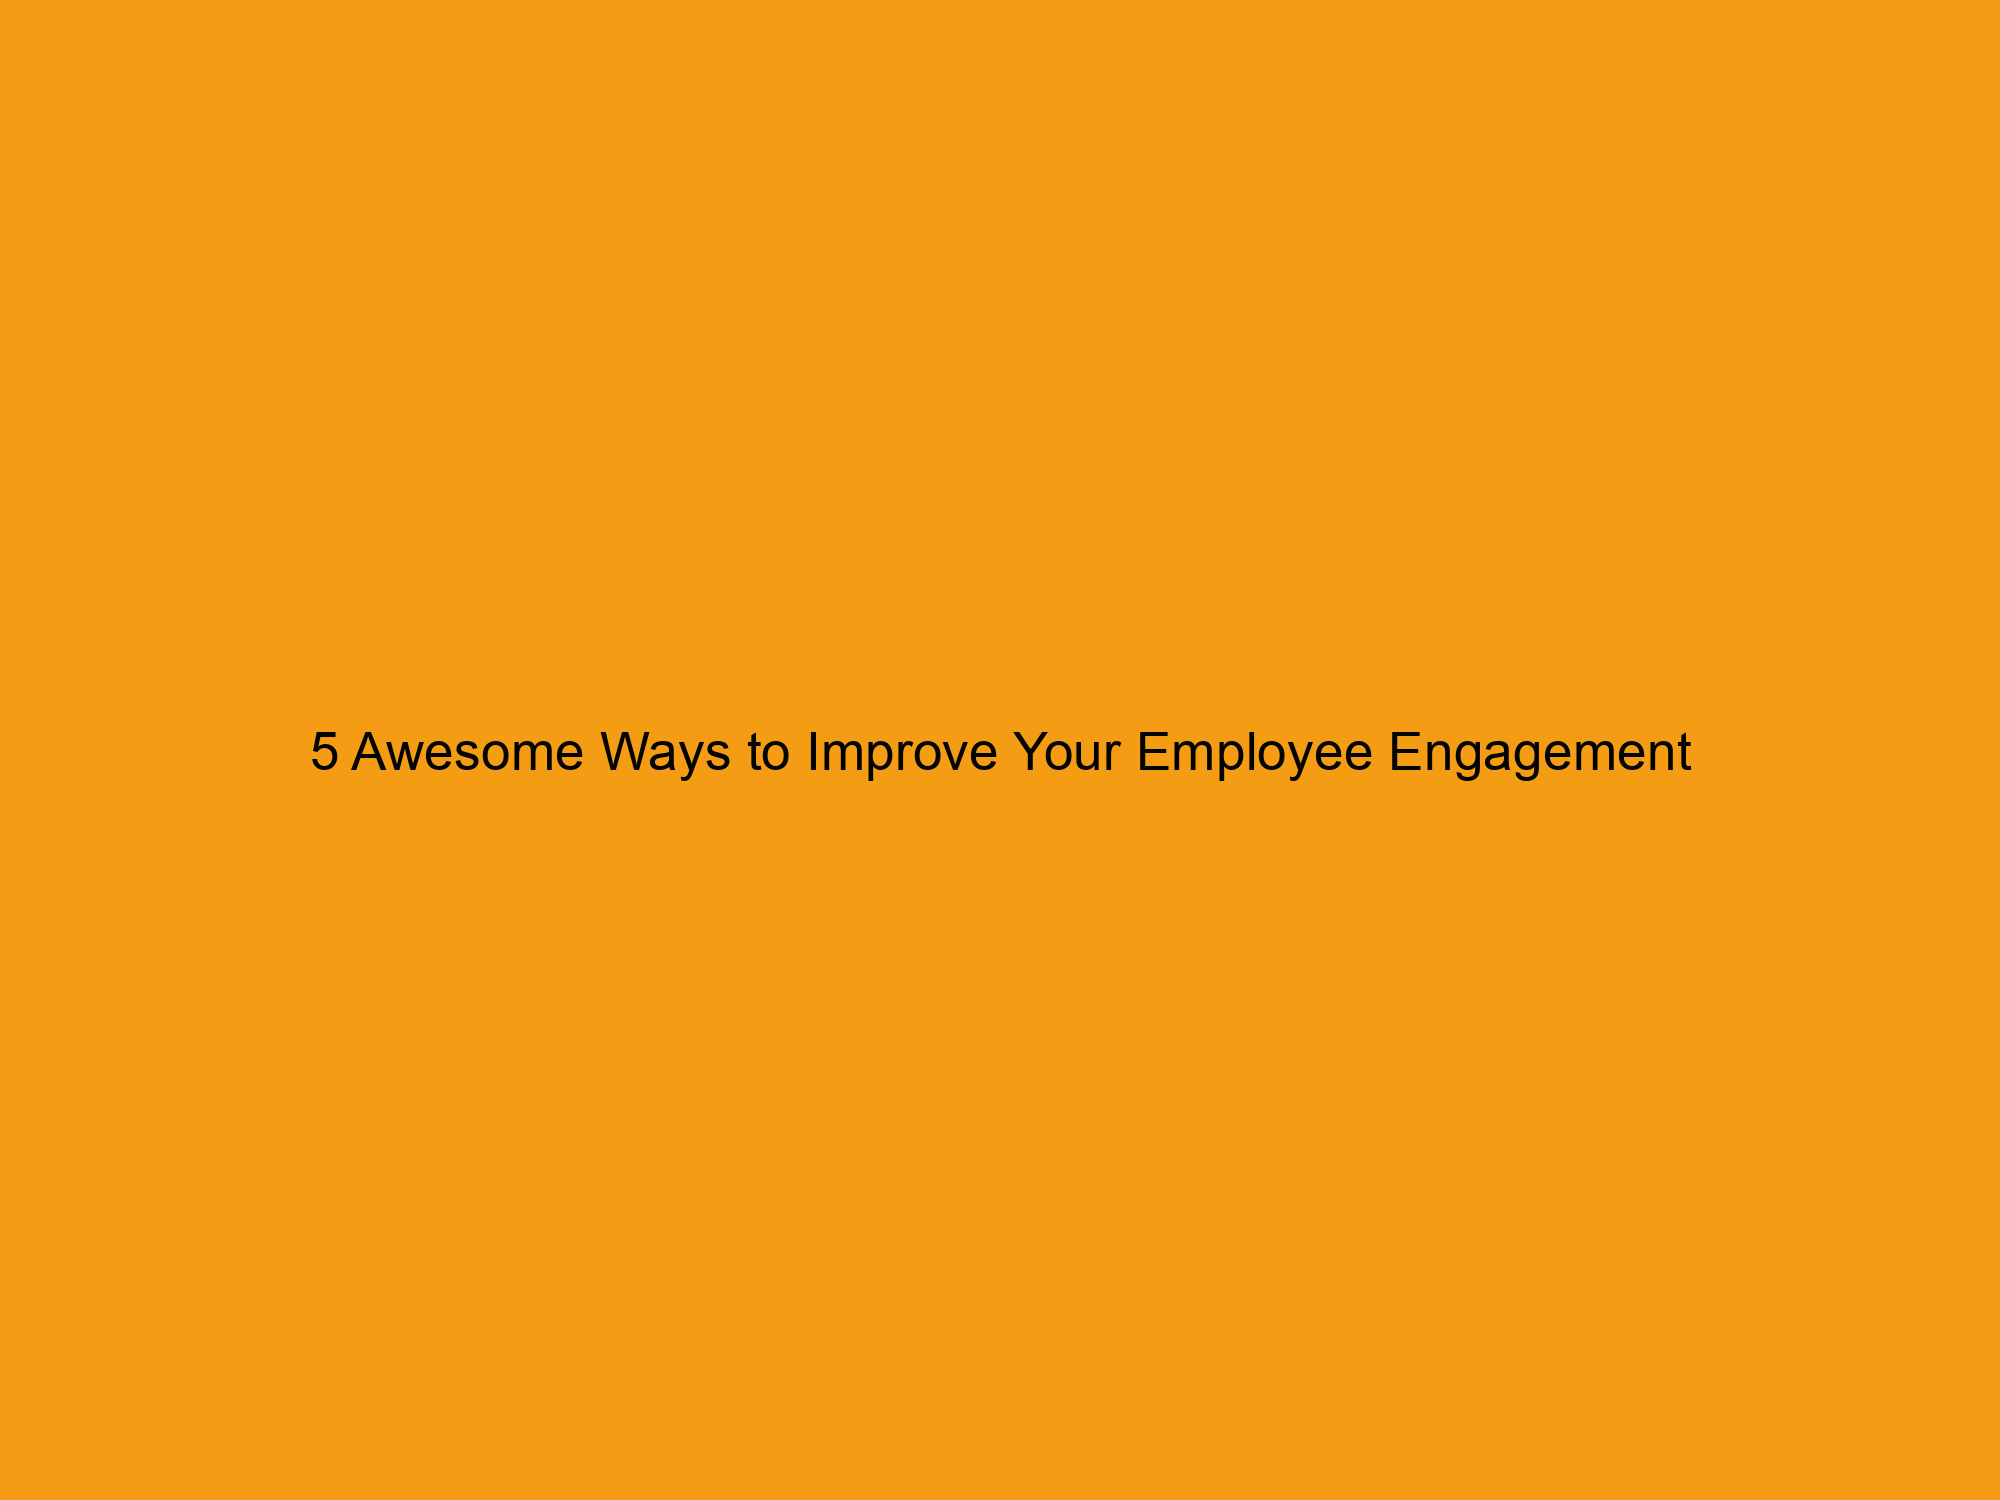 5 Awesome Ways to Improve Your Employee Engagement